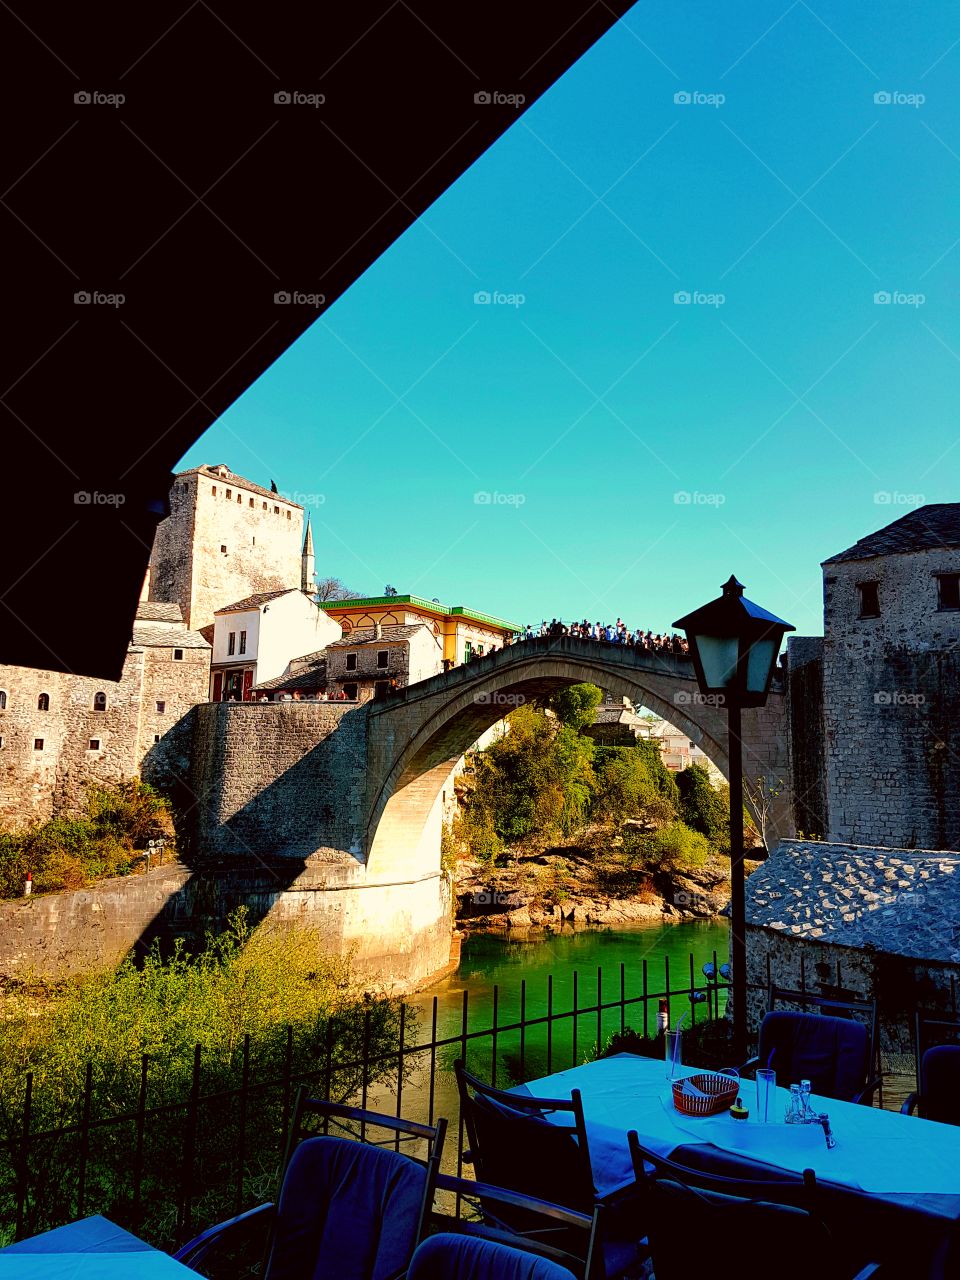 The old Bridge in the beautiful city of Mostar.